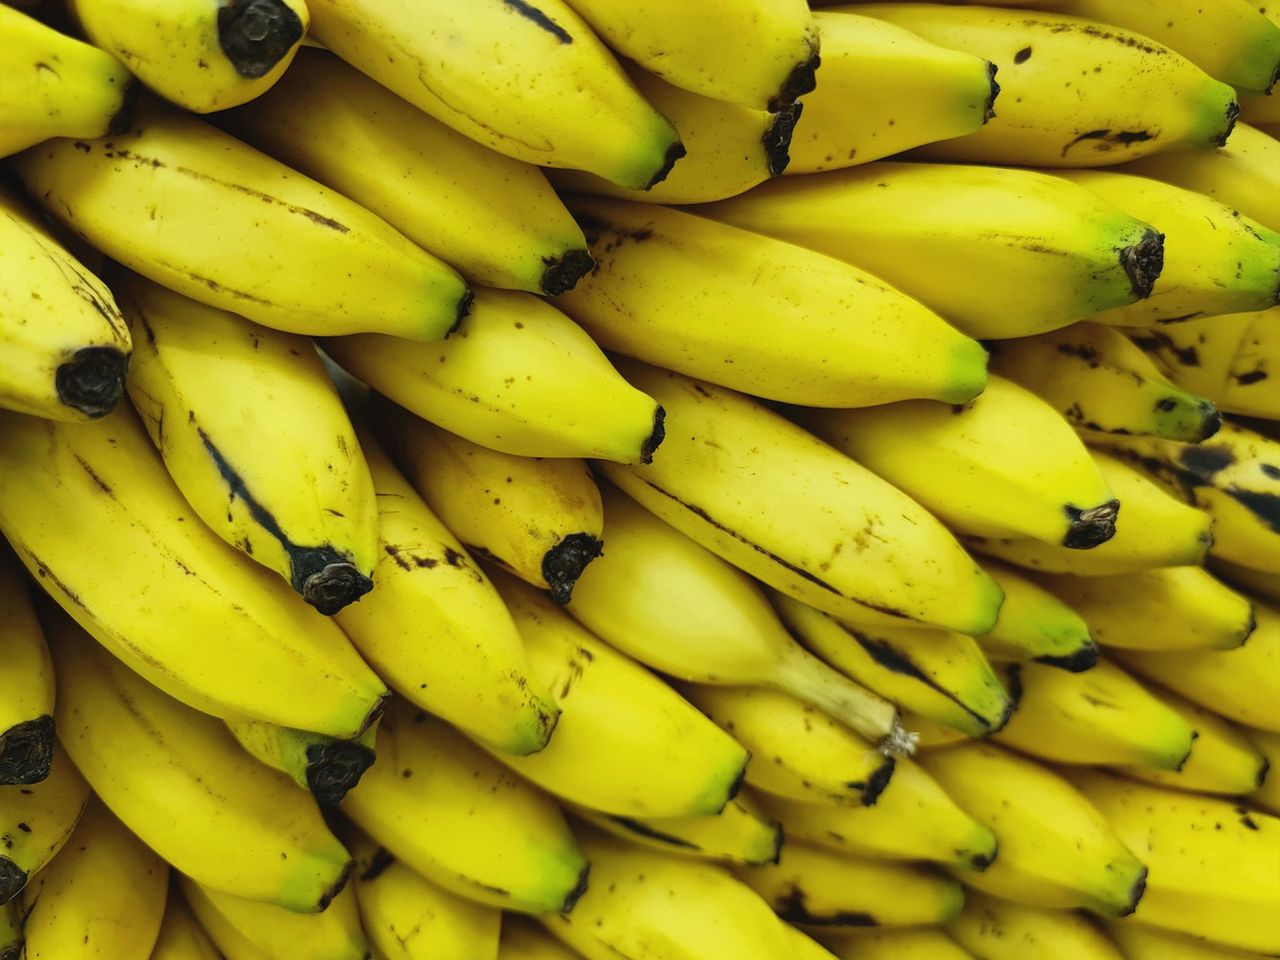 Is it worth eating bananas?